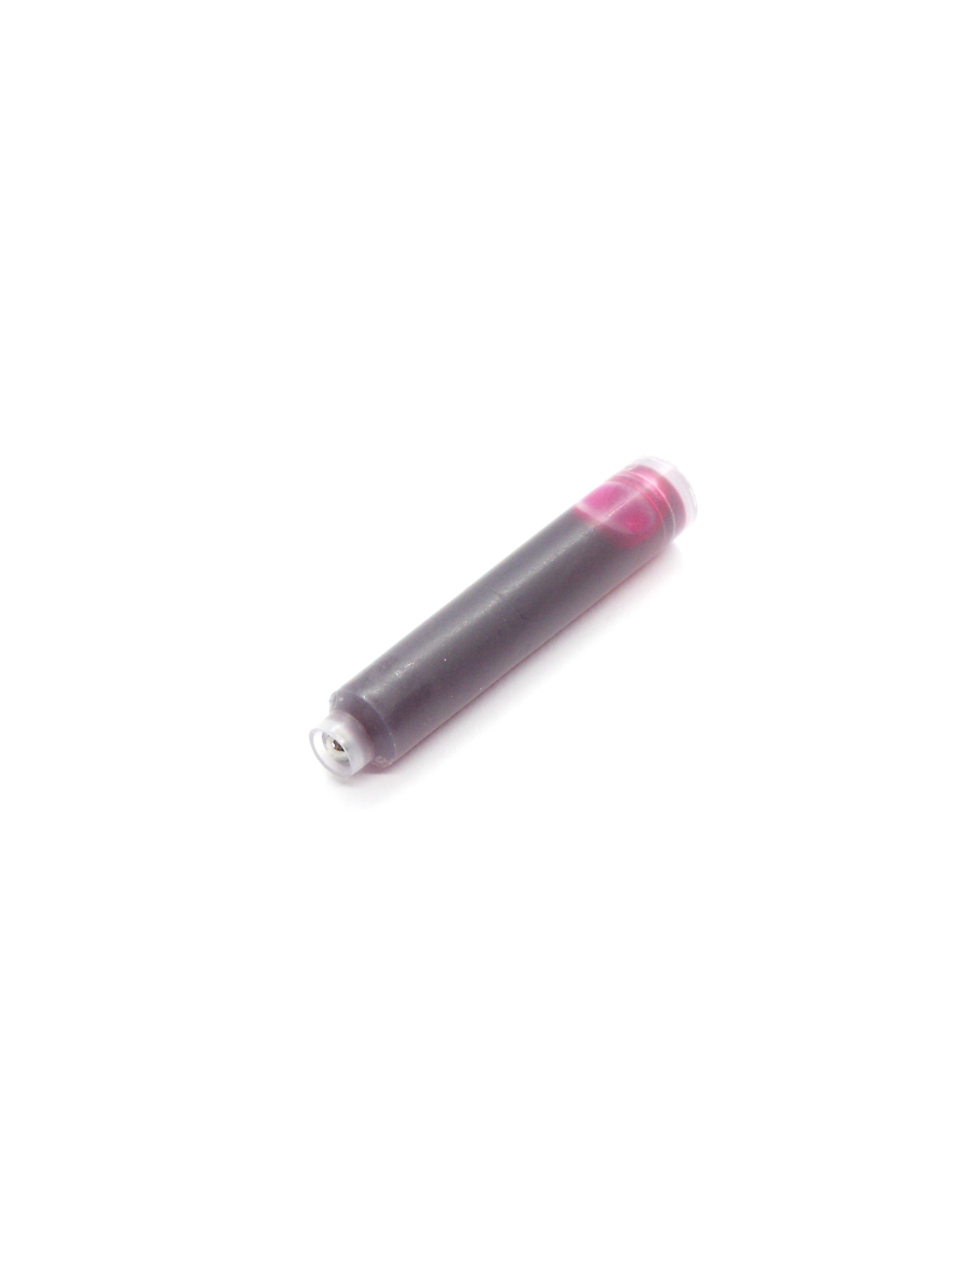 Cartridges For Haolilai Fountain Pens (Pink)